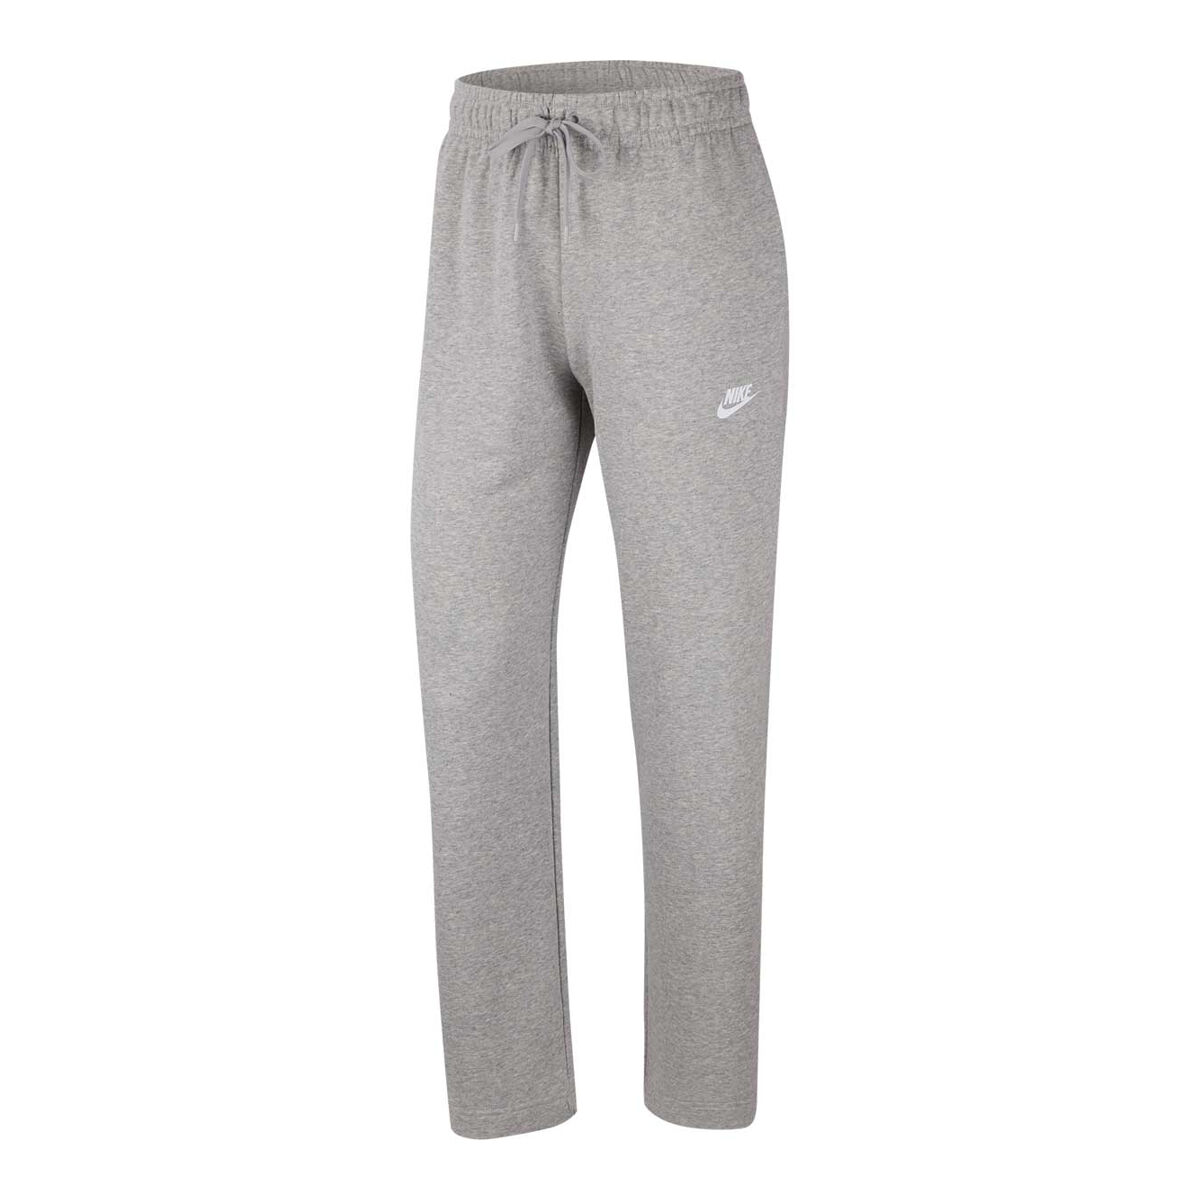 grey nike tracksuit bottoms womens